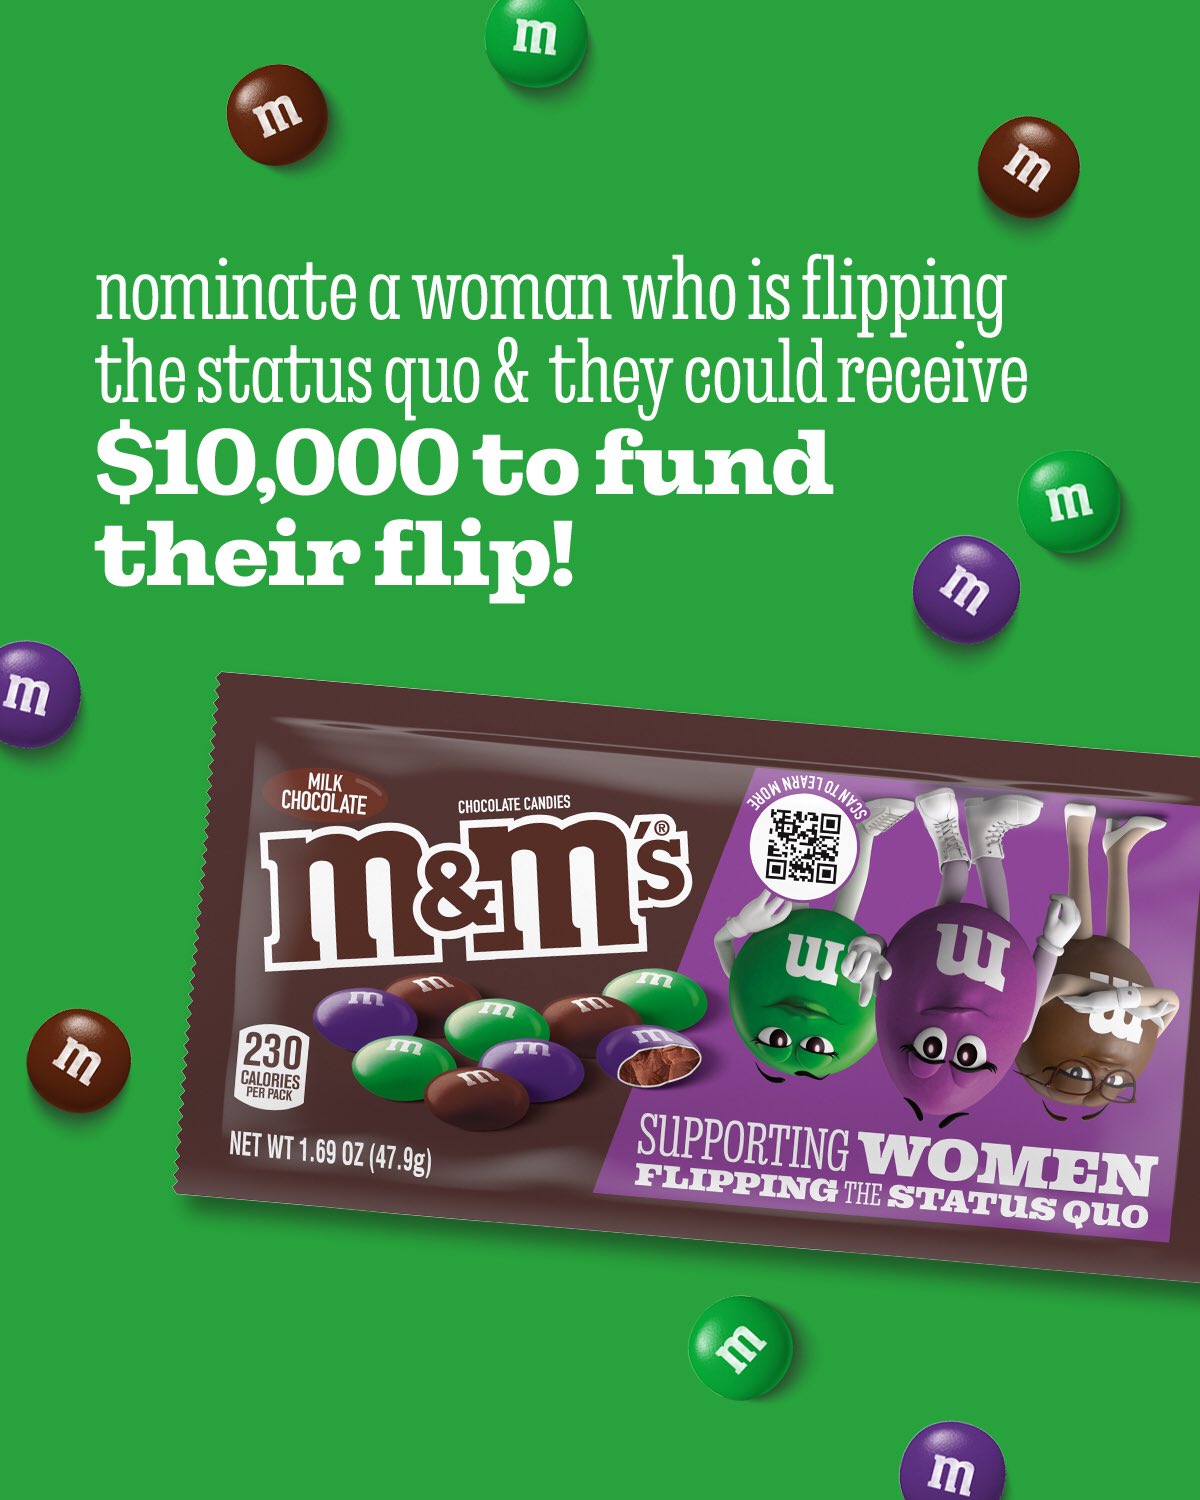 M&M's Challenges Status Quo With All-Female Package - Food Fanatic